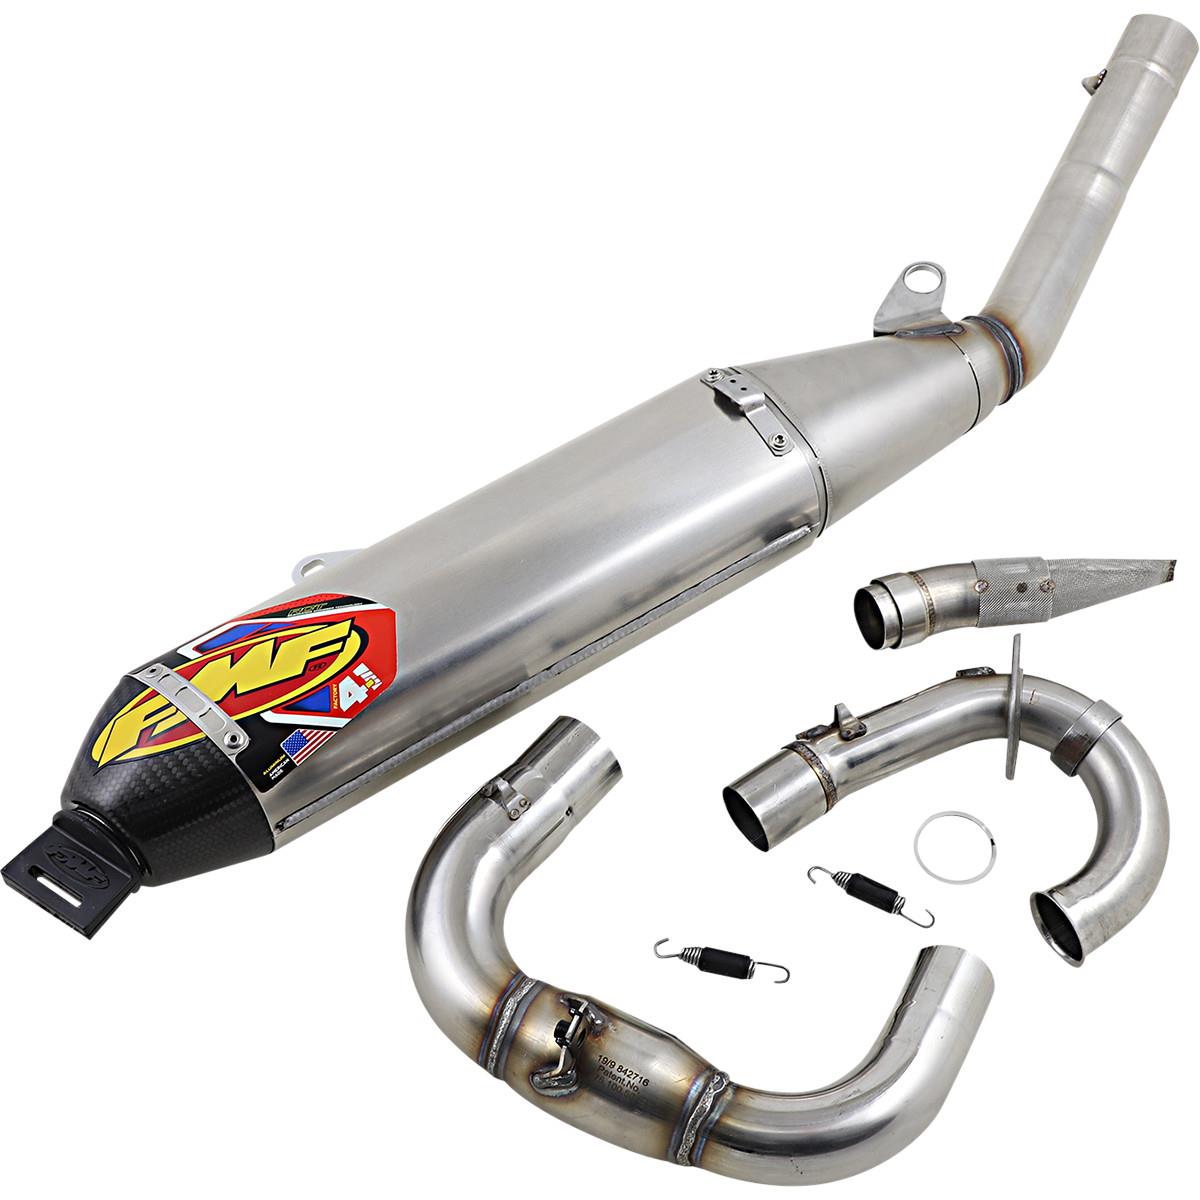 FMF Scarico completo 4.1 RCT Stainless Yamaha YZ 450F 20-22, Fantic XXF 450